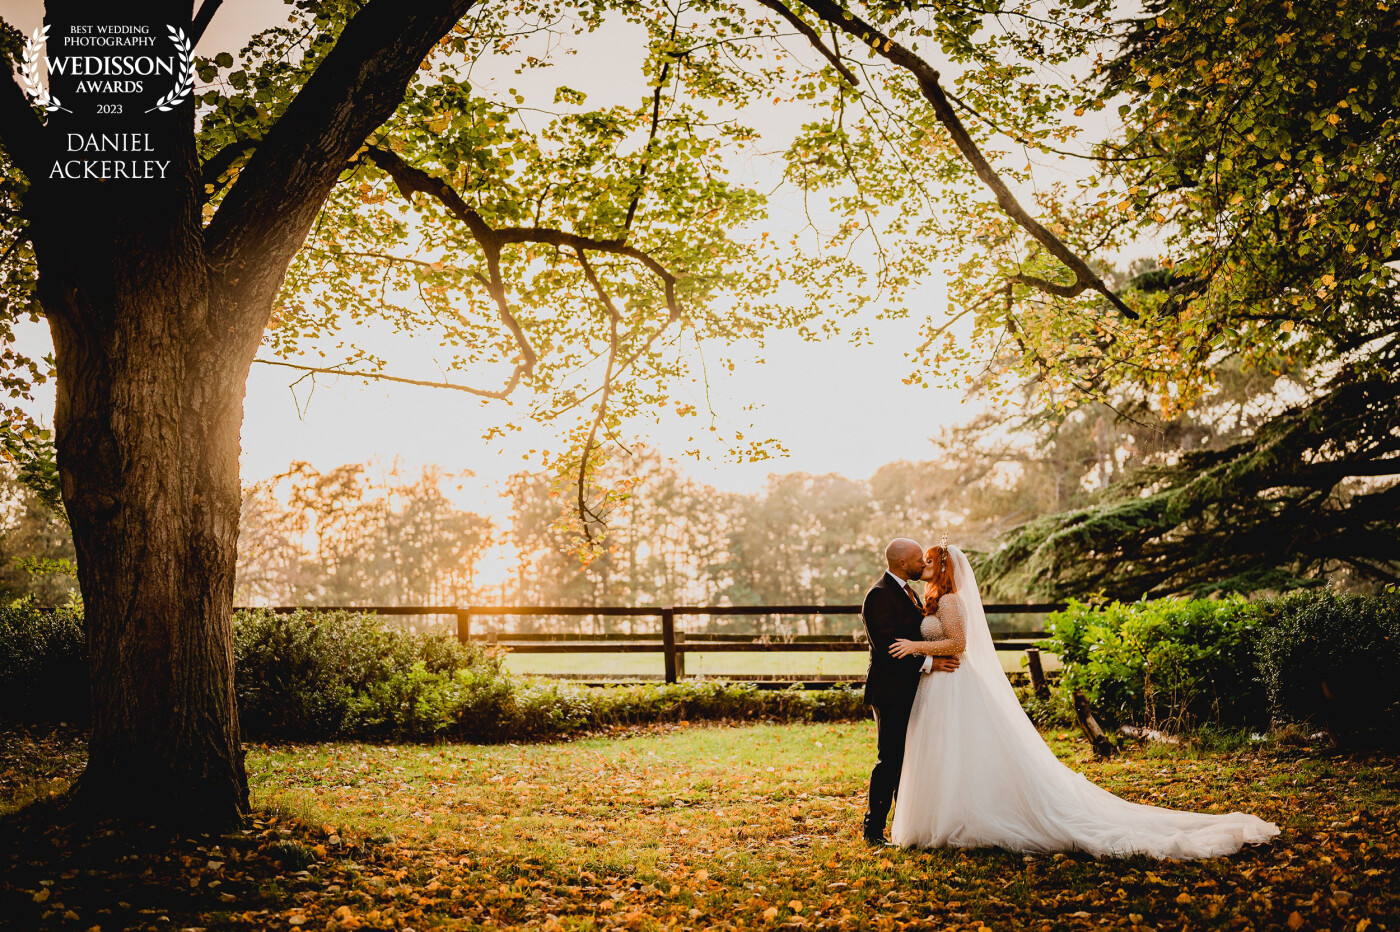 We had a stunning evening with some beautiful light at Lanwades Hall, so I just asked Danni & Clive to have an intimate little moment next to this huge tree, and it really made for a lovely romantic scene.